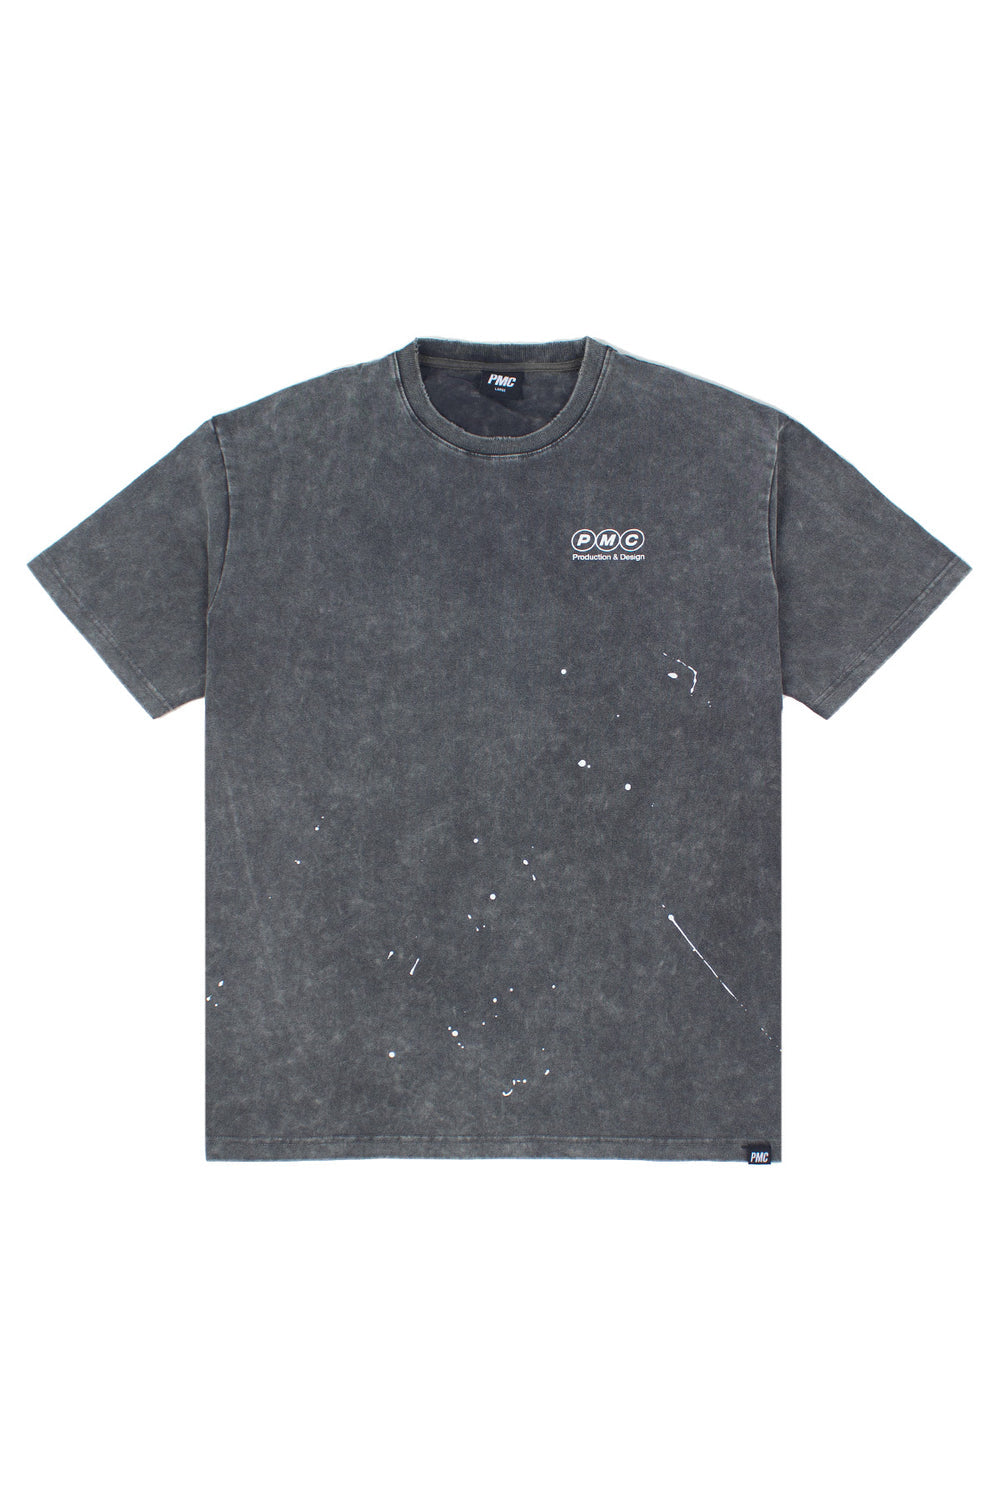 PMC | Production Logo Stone Washed Tee Charcoal